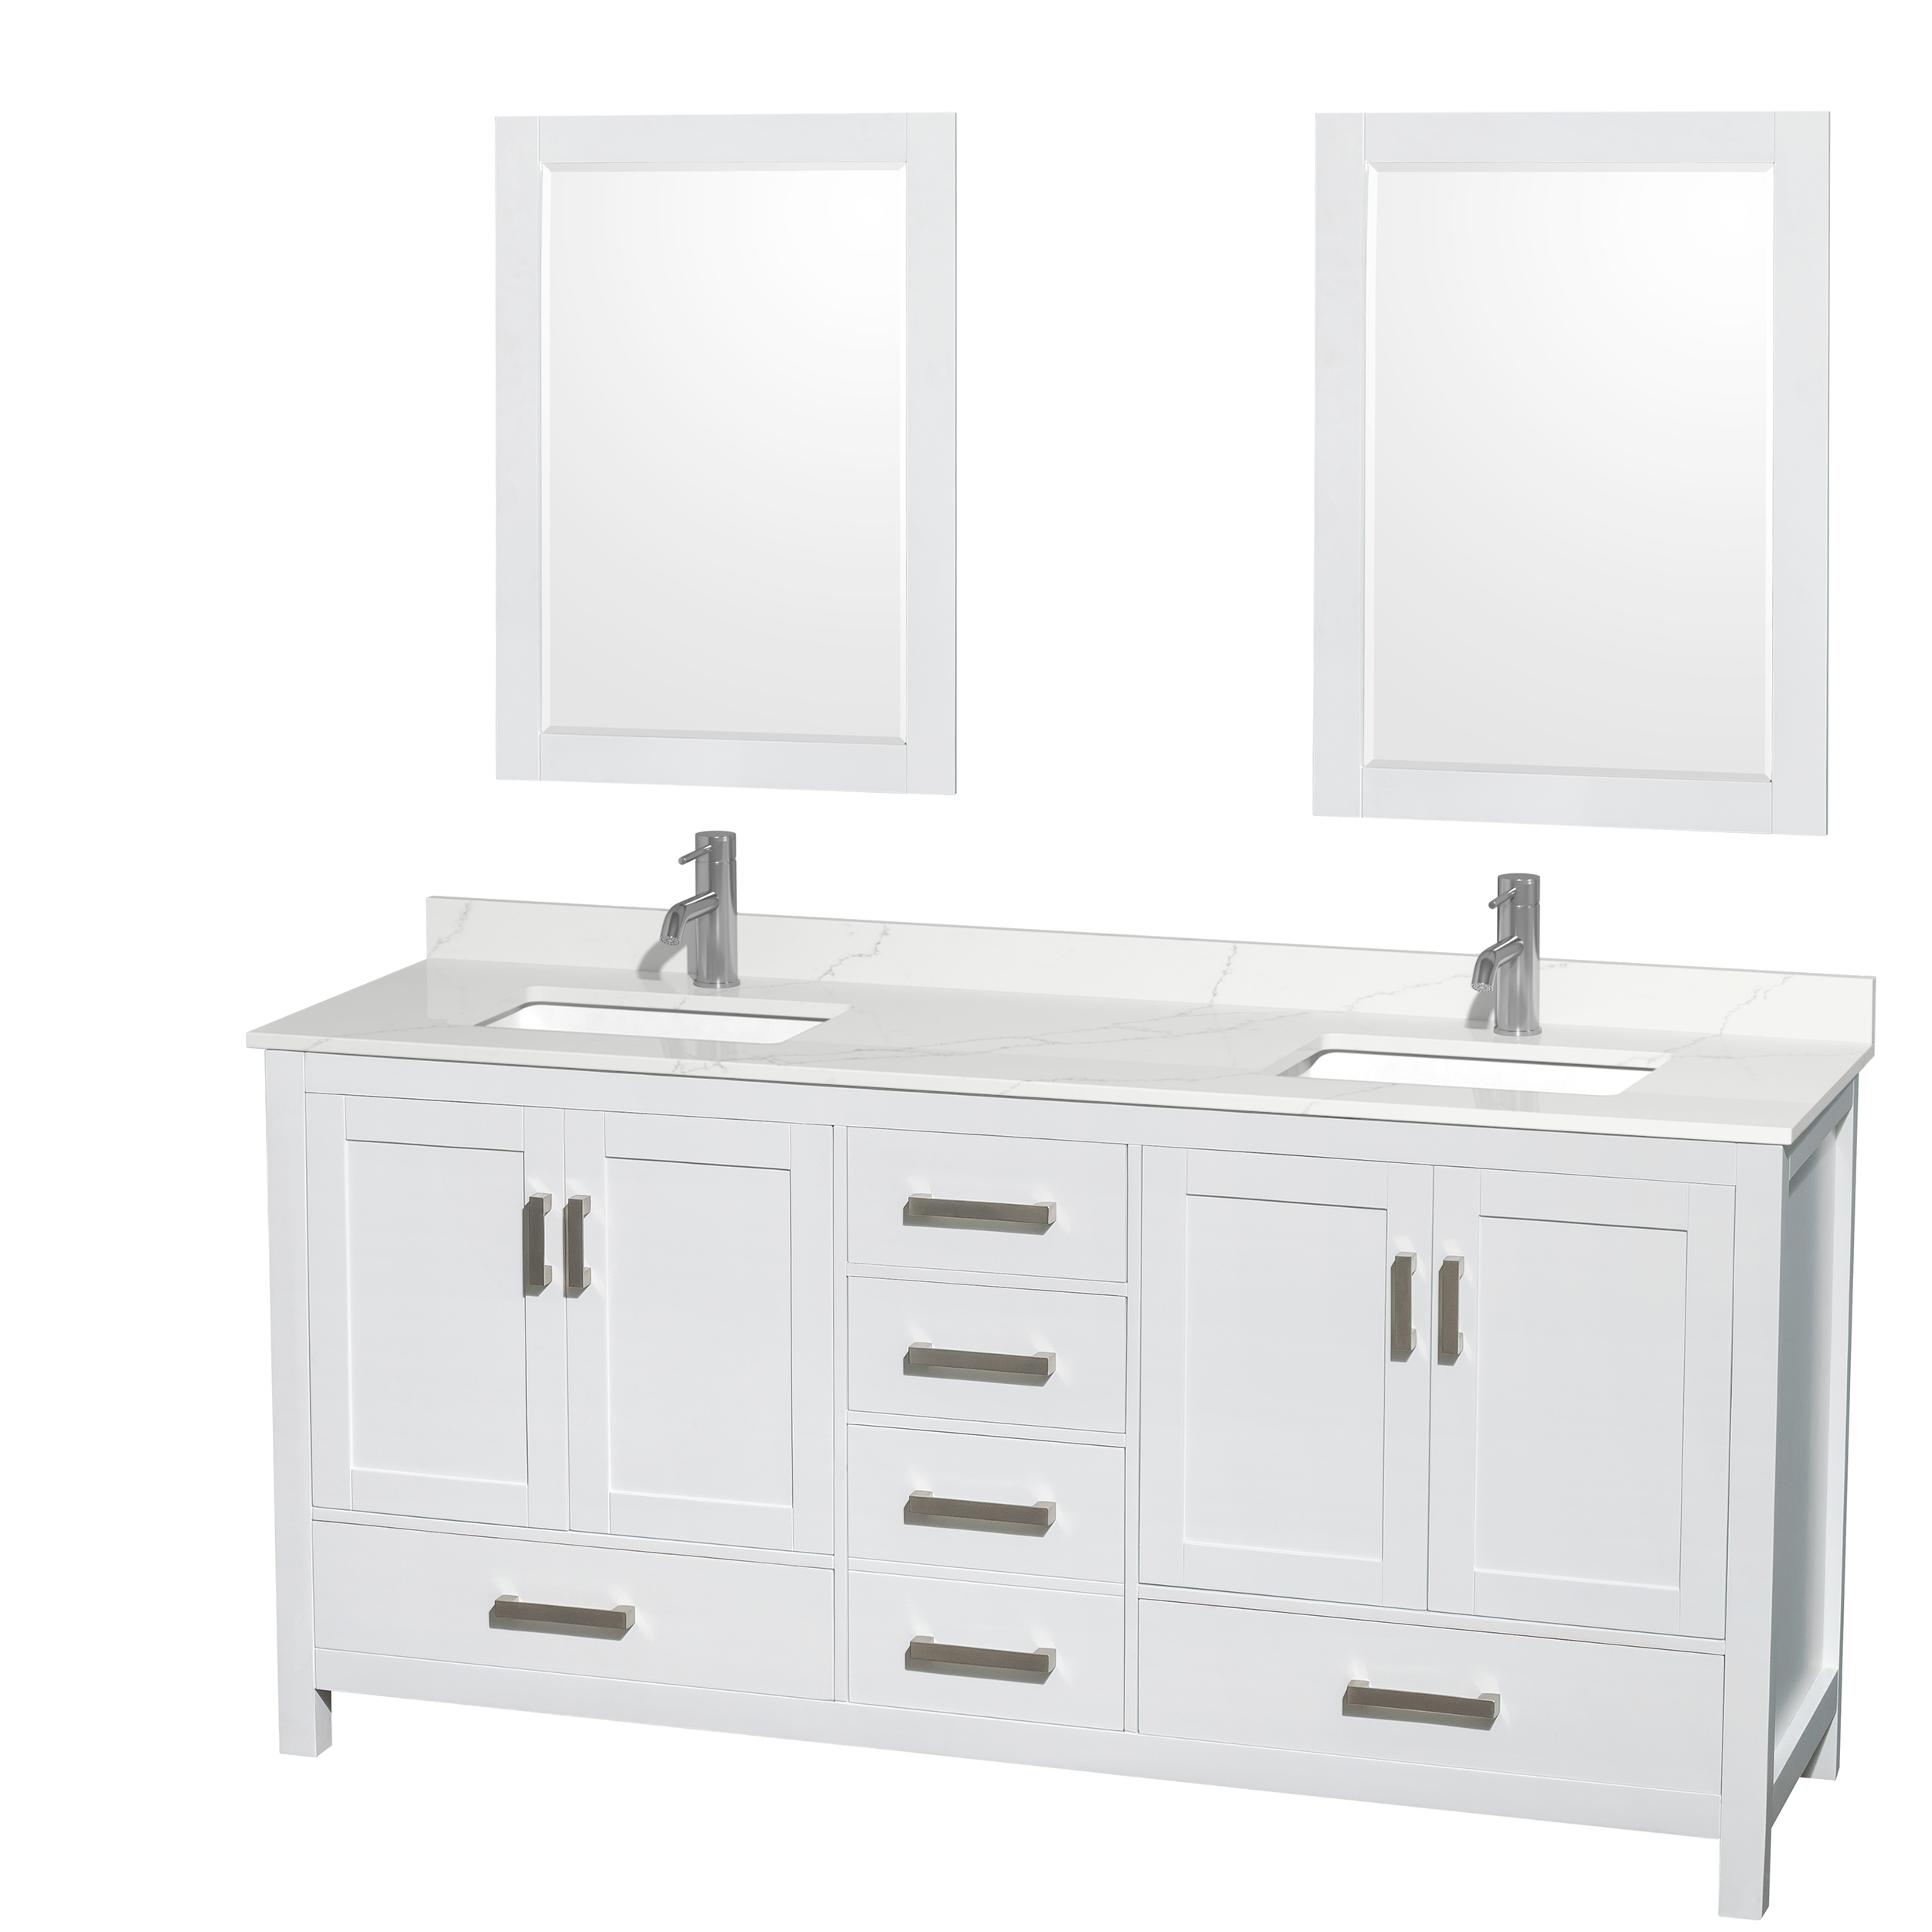 sheffield 72" double bathroom vanity by wyndham collection - white